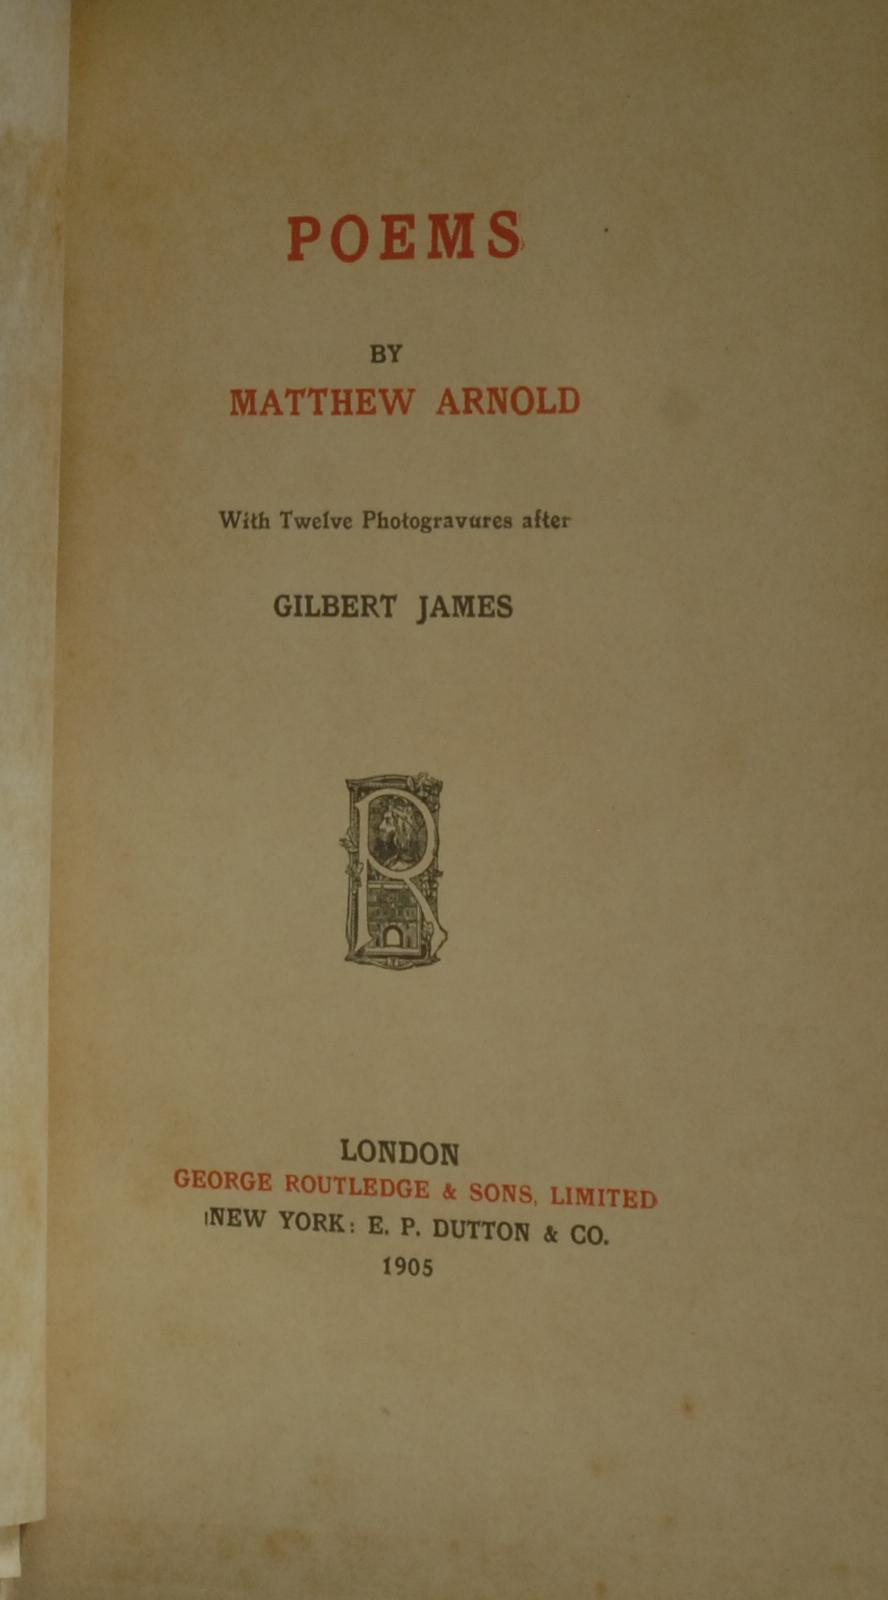 mbb006741b_-_Arnold_Mathew_-_Poems_By_Mathew_Arnold_-_Contains_Illustrations.jpg